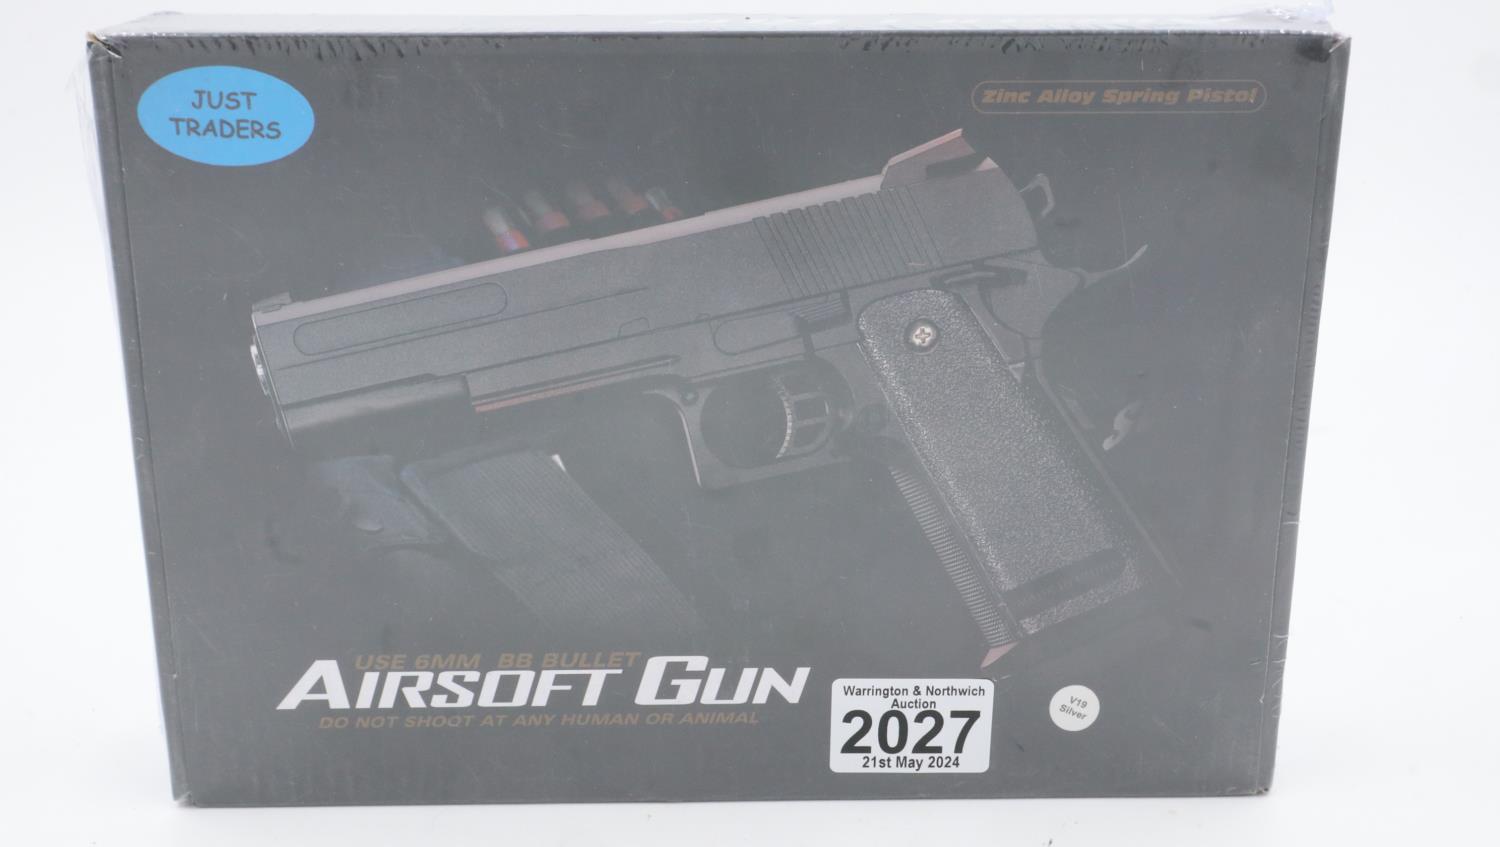 New old stock airsoft pistol, model V19 in silver, boxed. UK P&P Group 1 (£16+VAT for the first